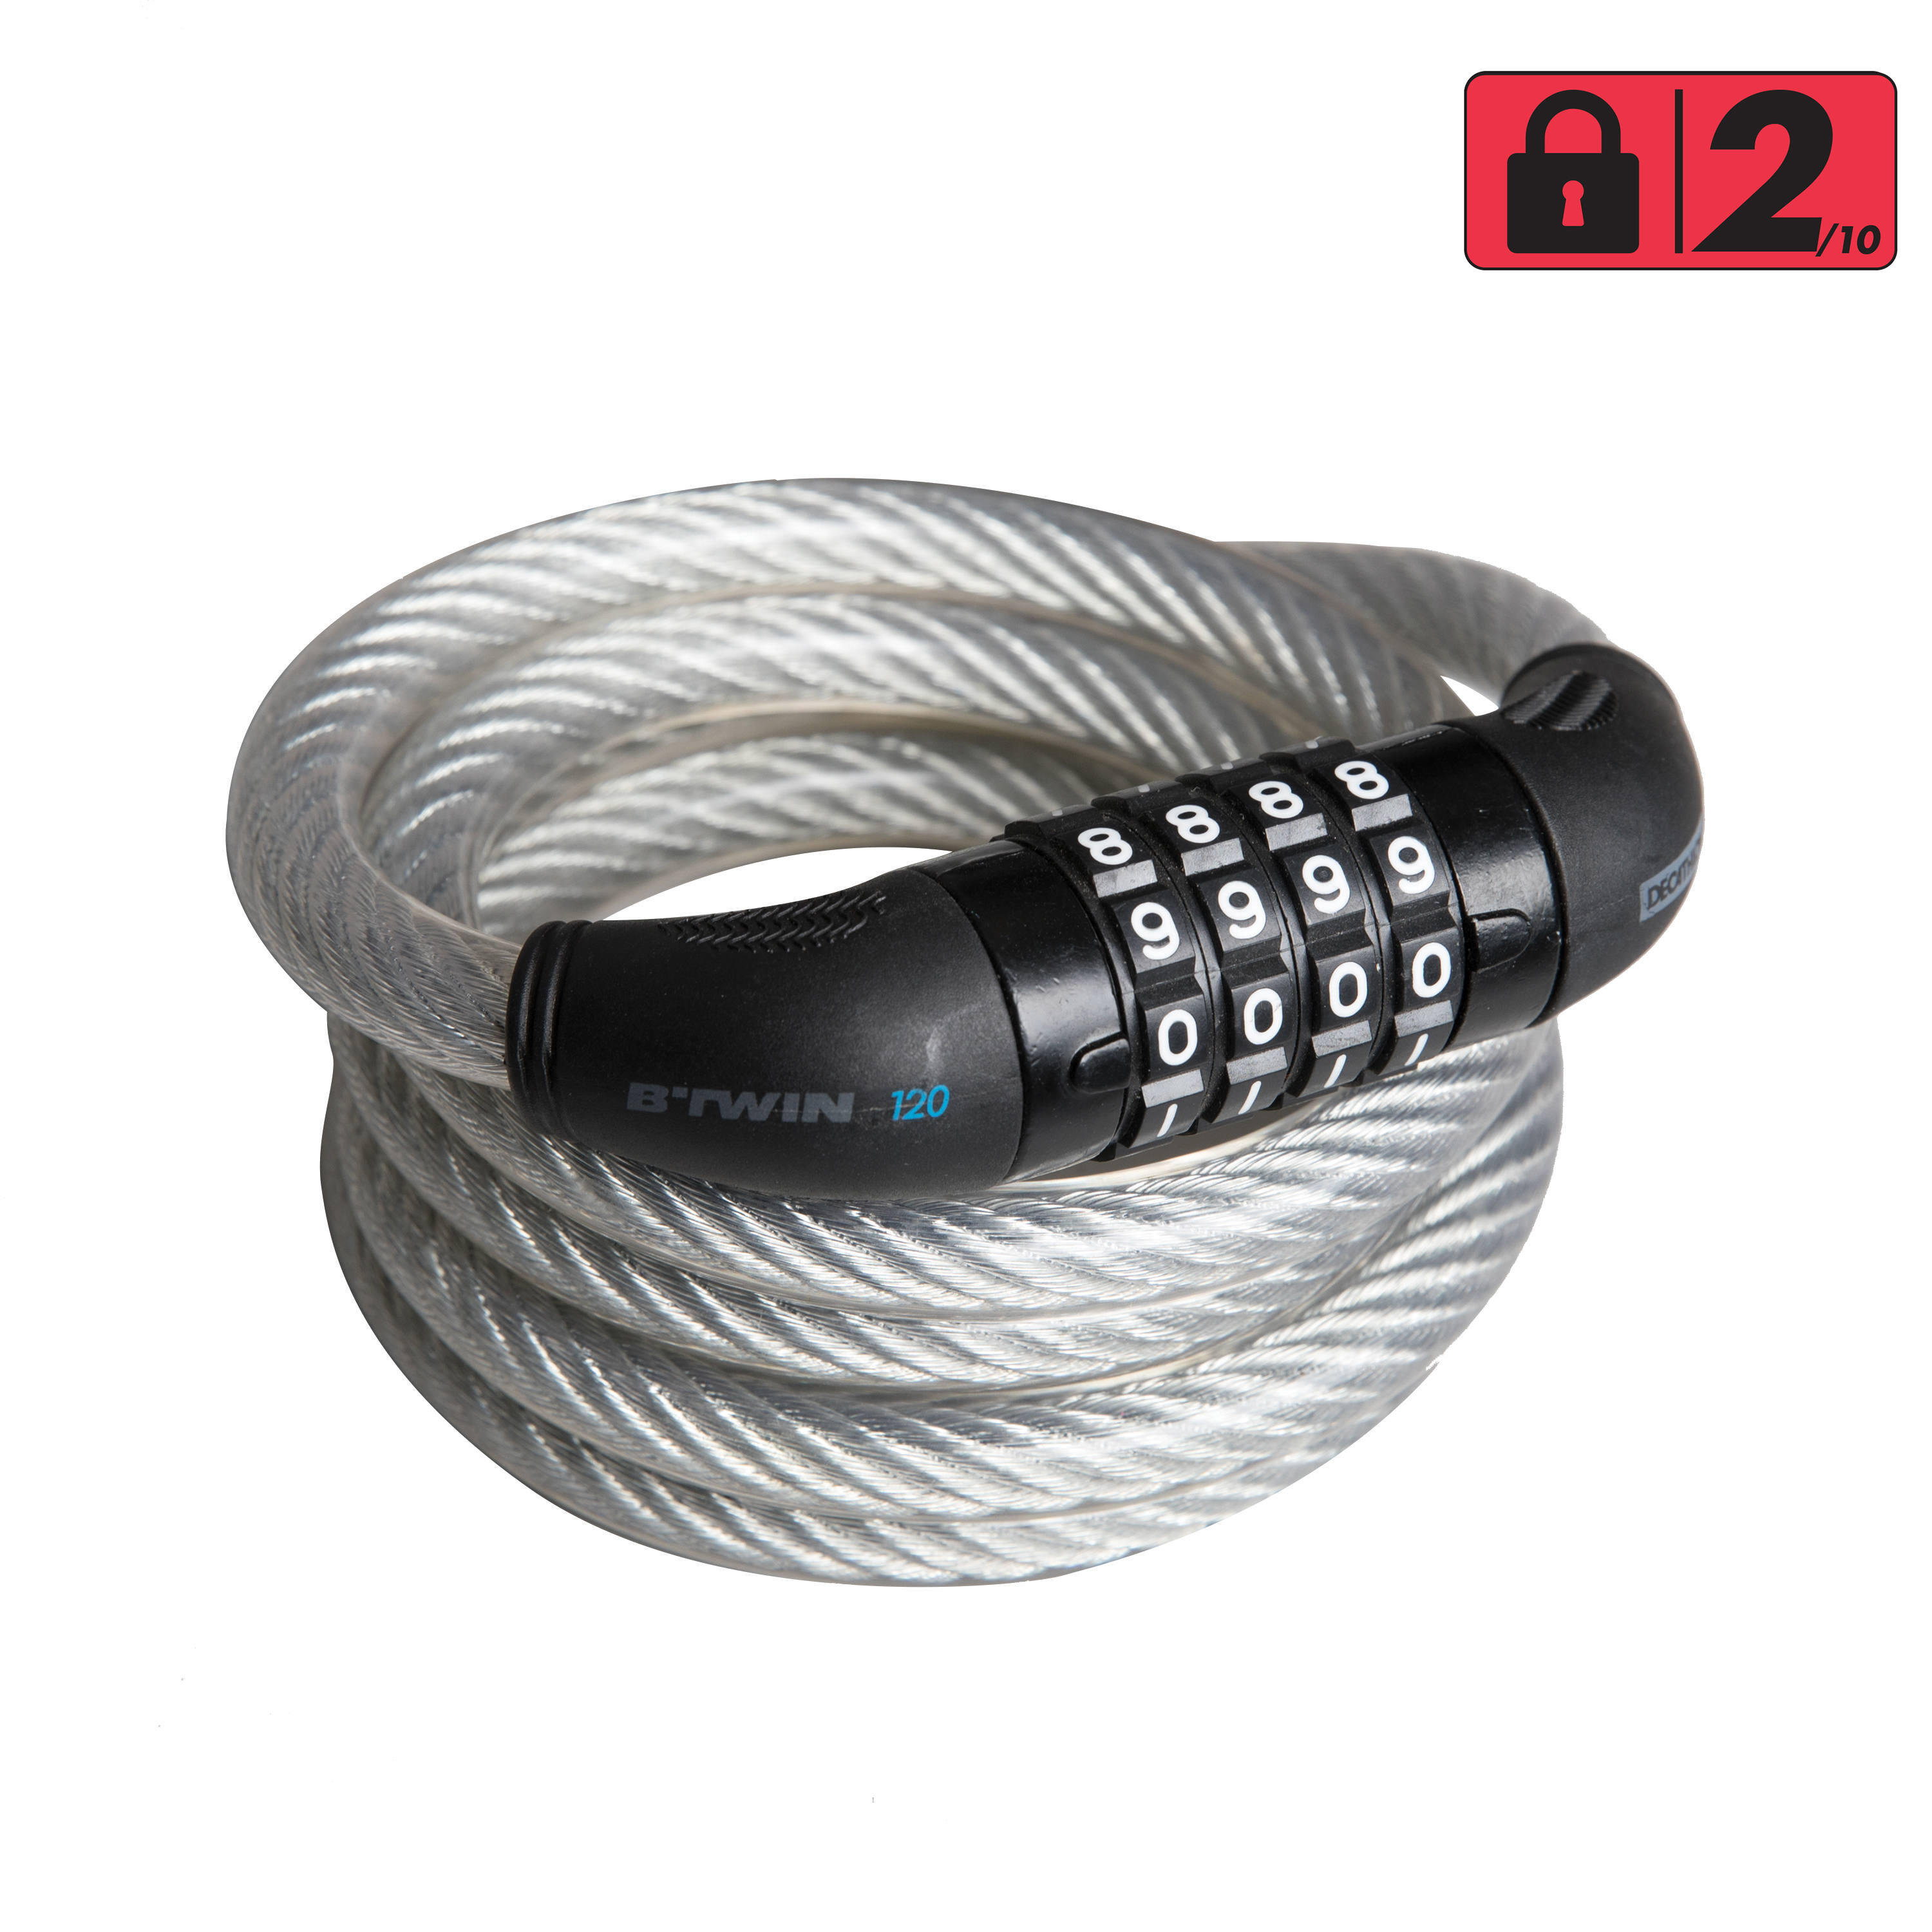 combination cable lock